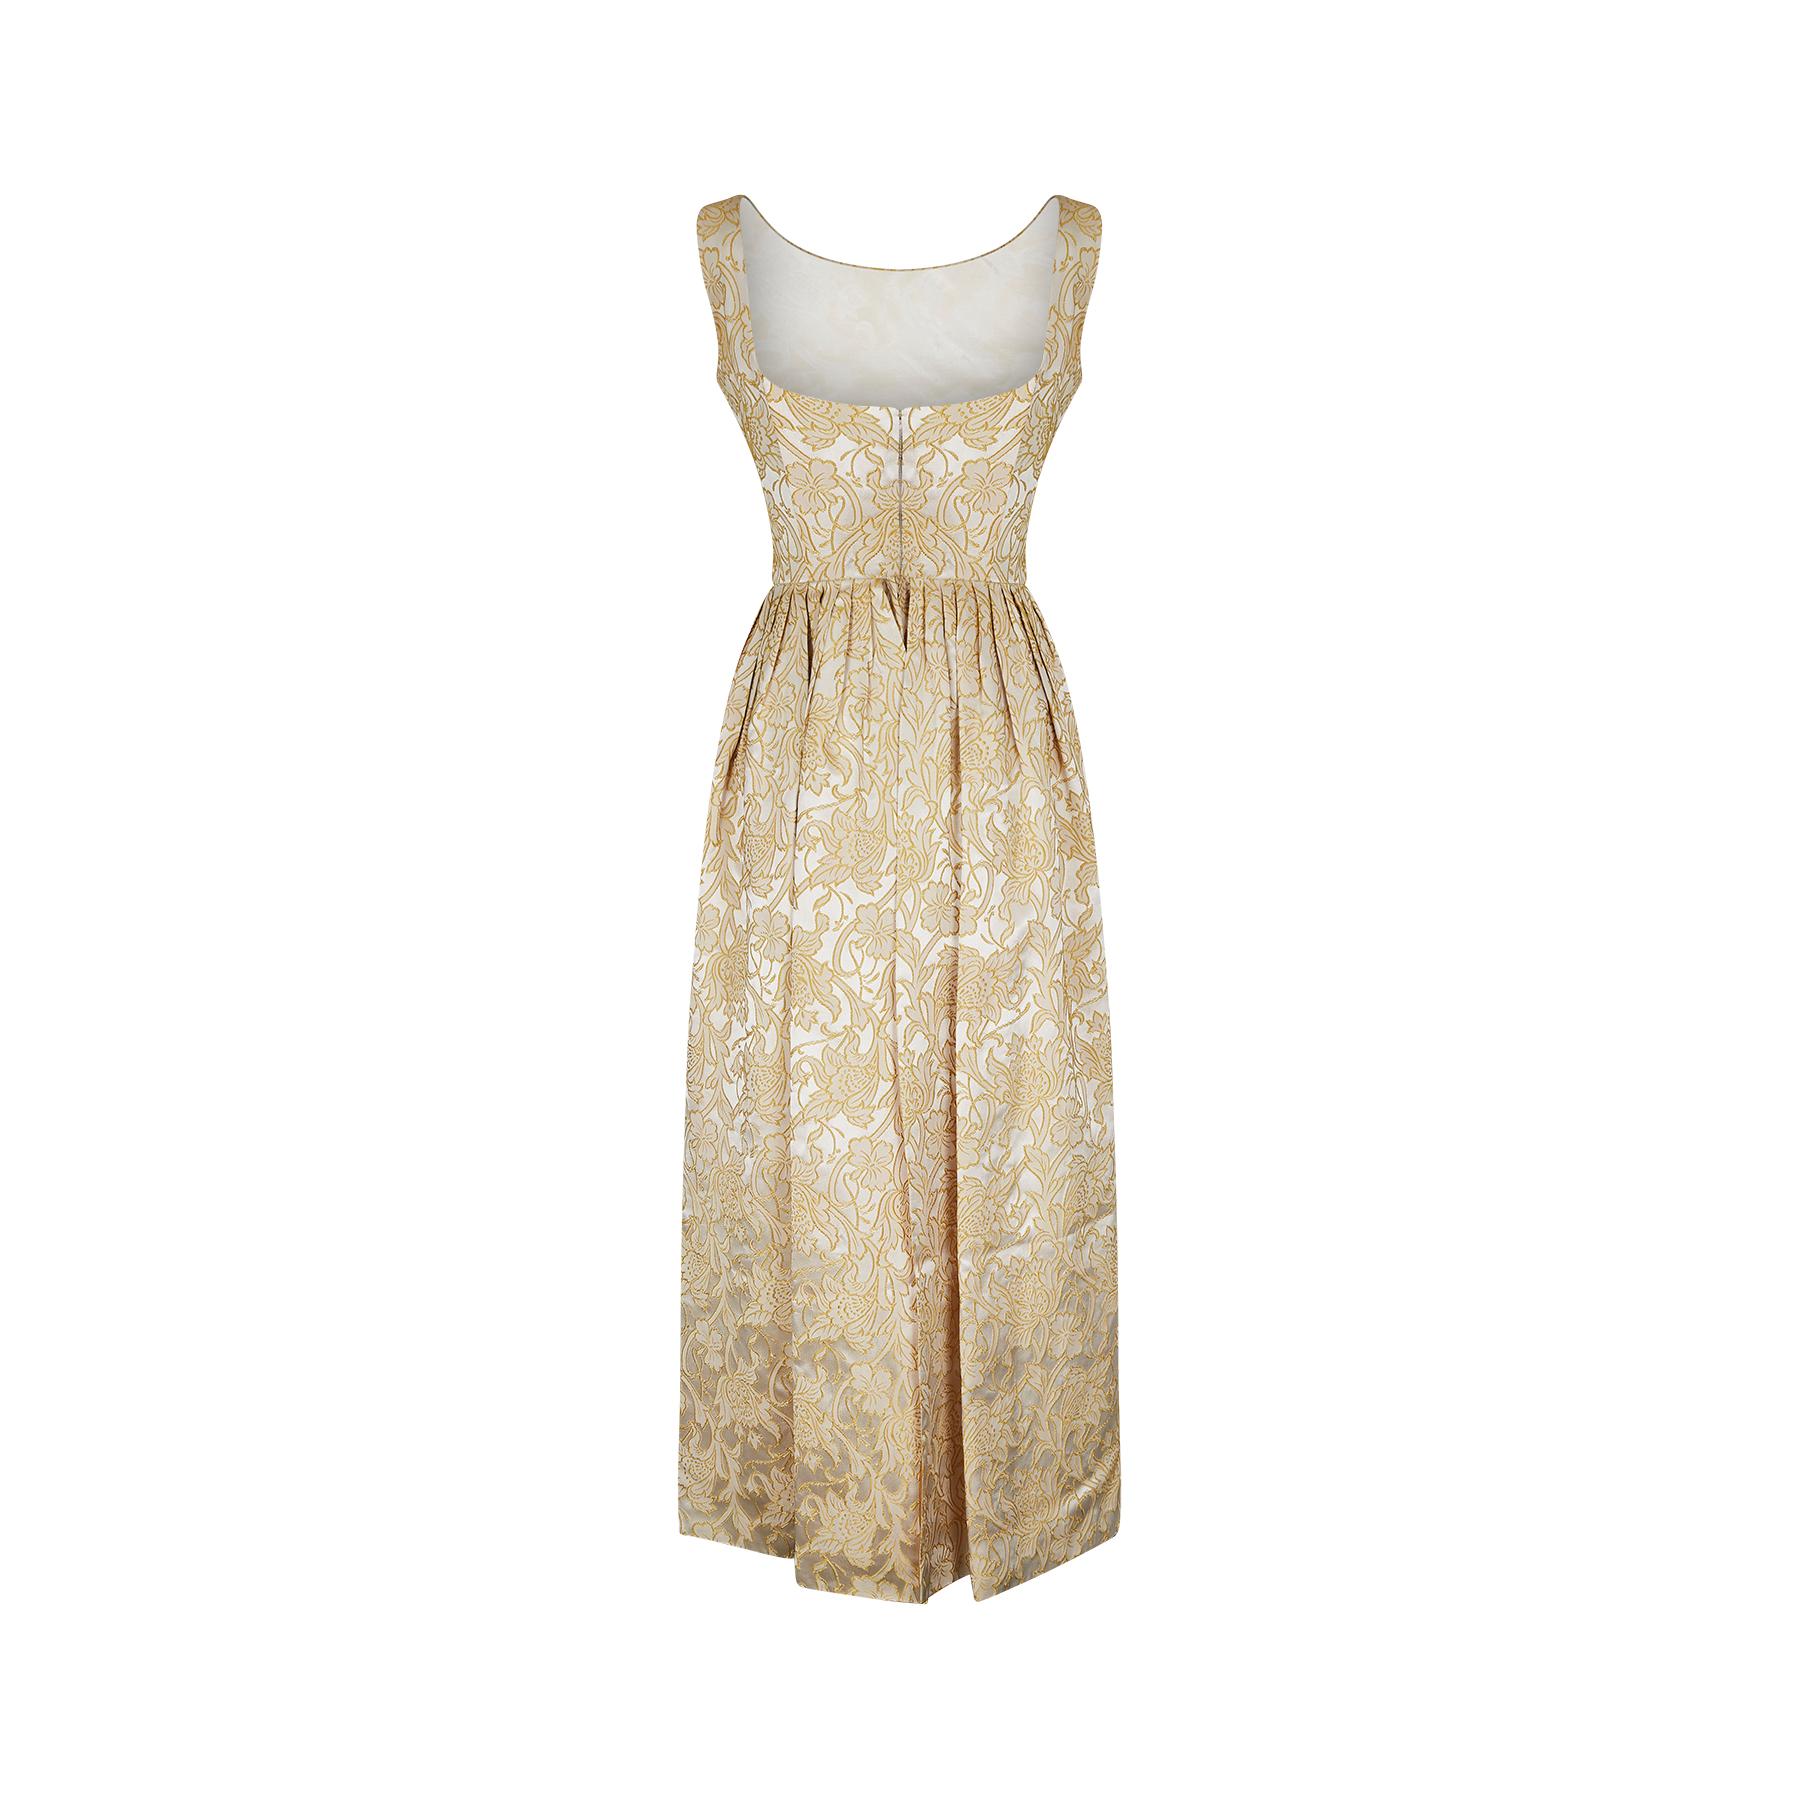 Beige 1950s Golden Yellow Floral Jacquard Dress with Train